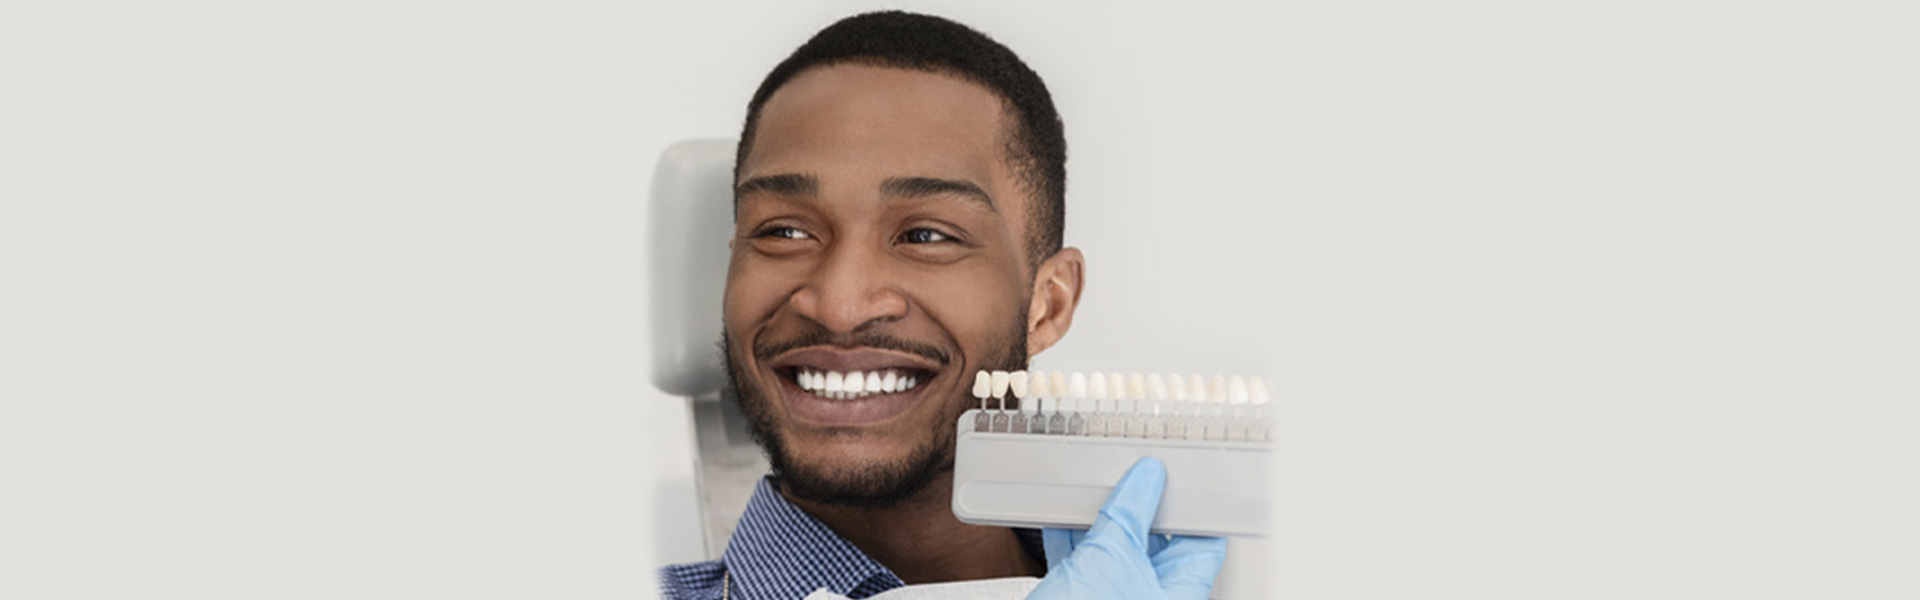 What Can Veneers Do to Change Your Smile and Life?